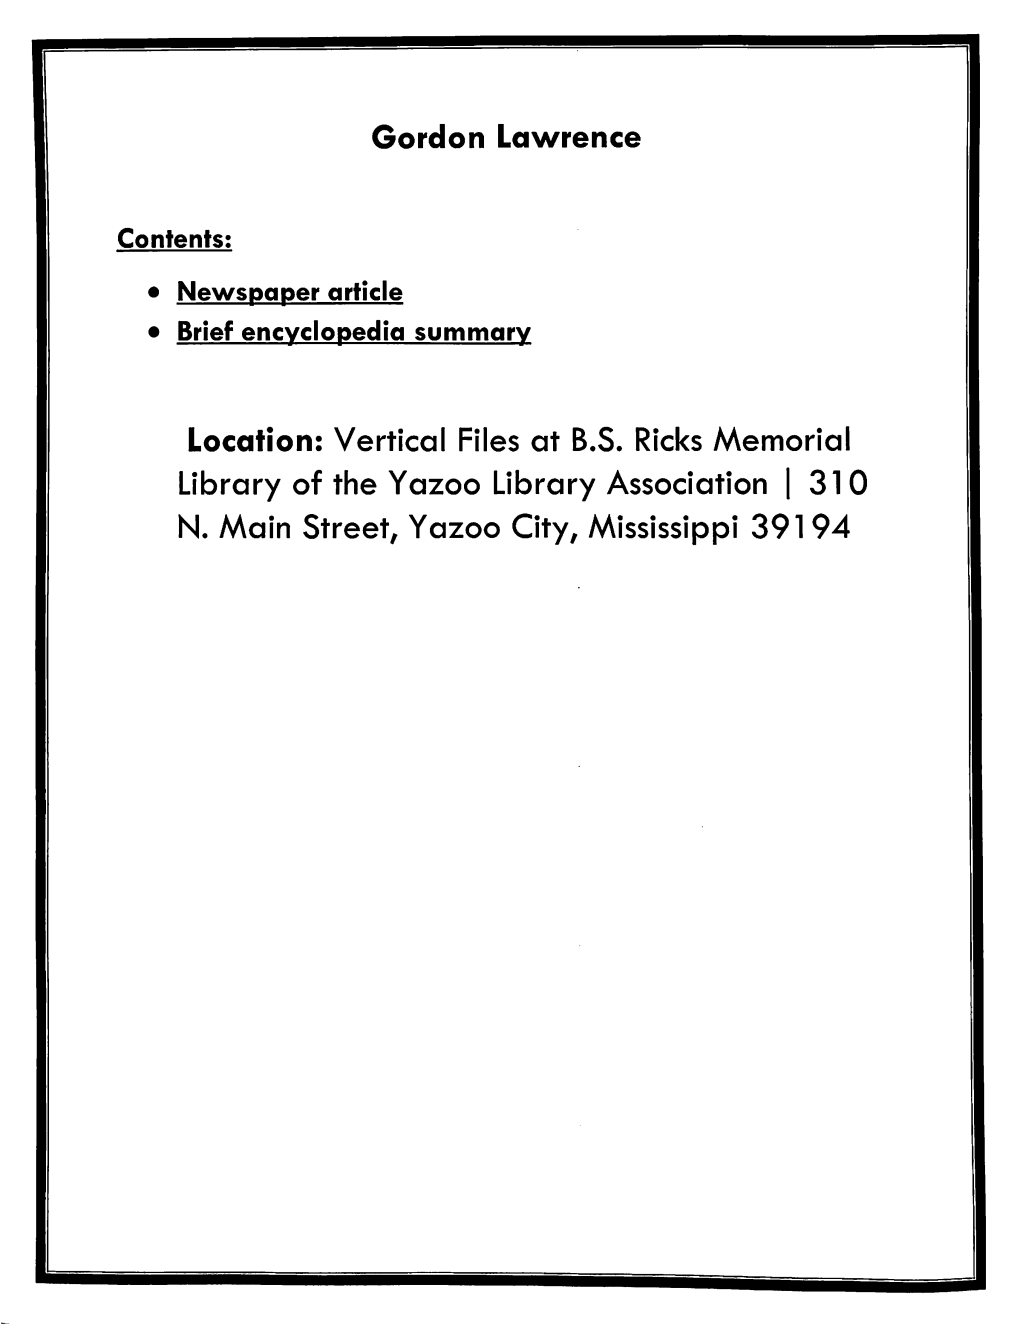 Library of the Yazoo Library Association| 310 N